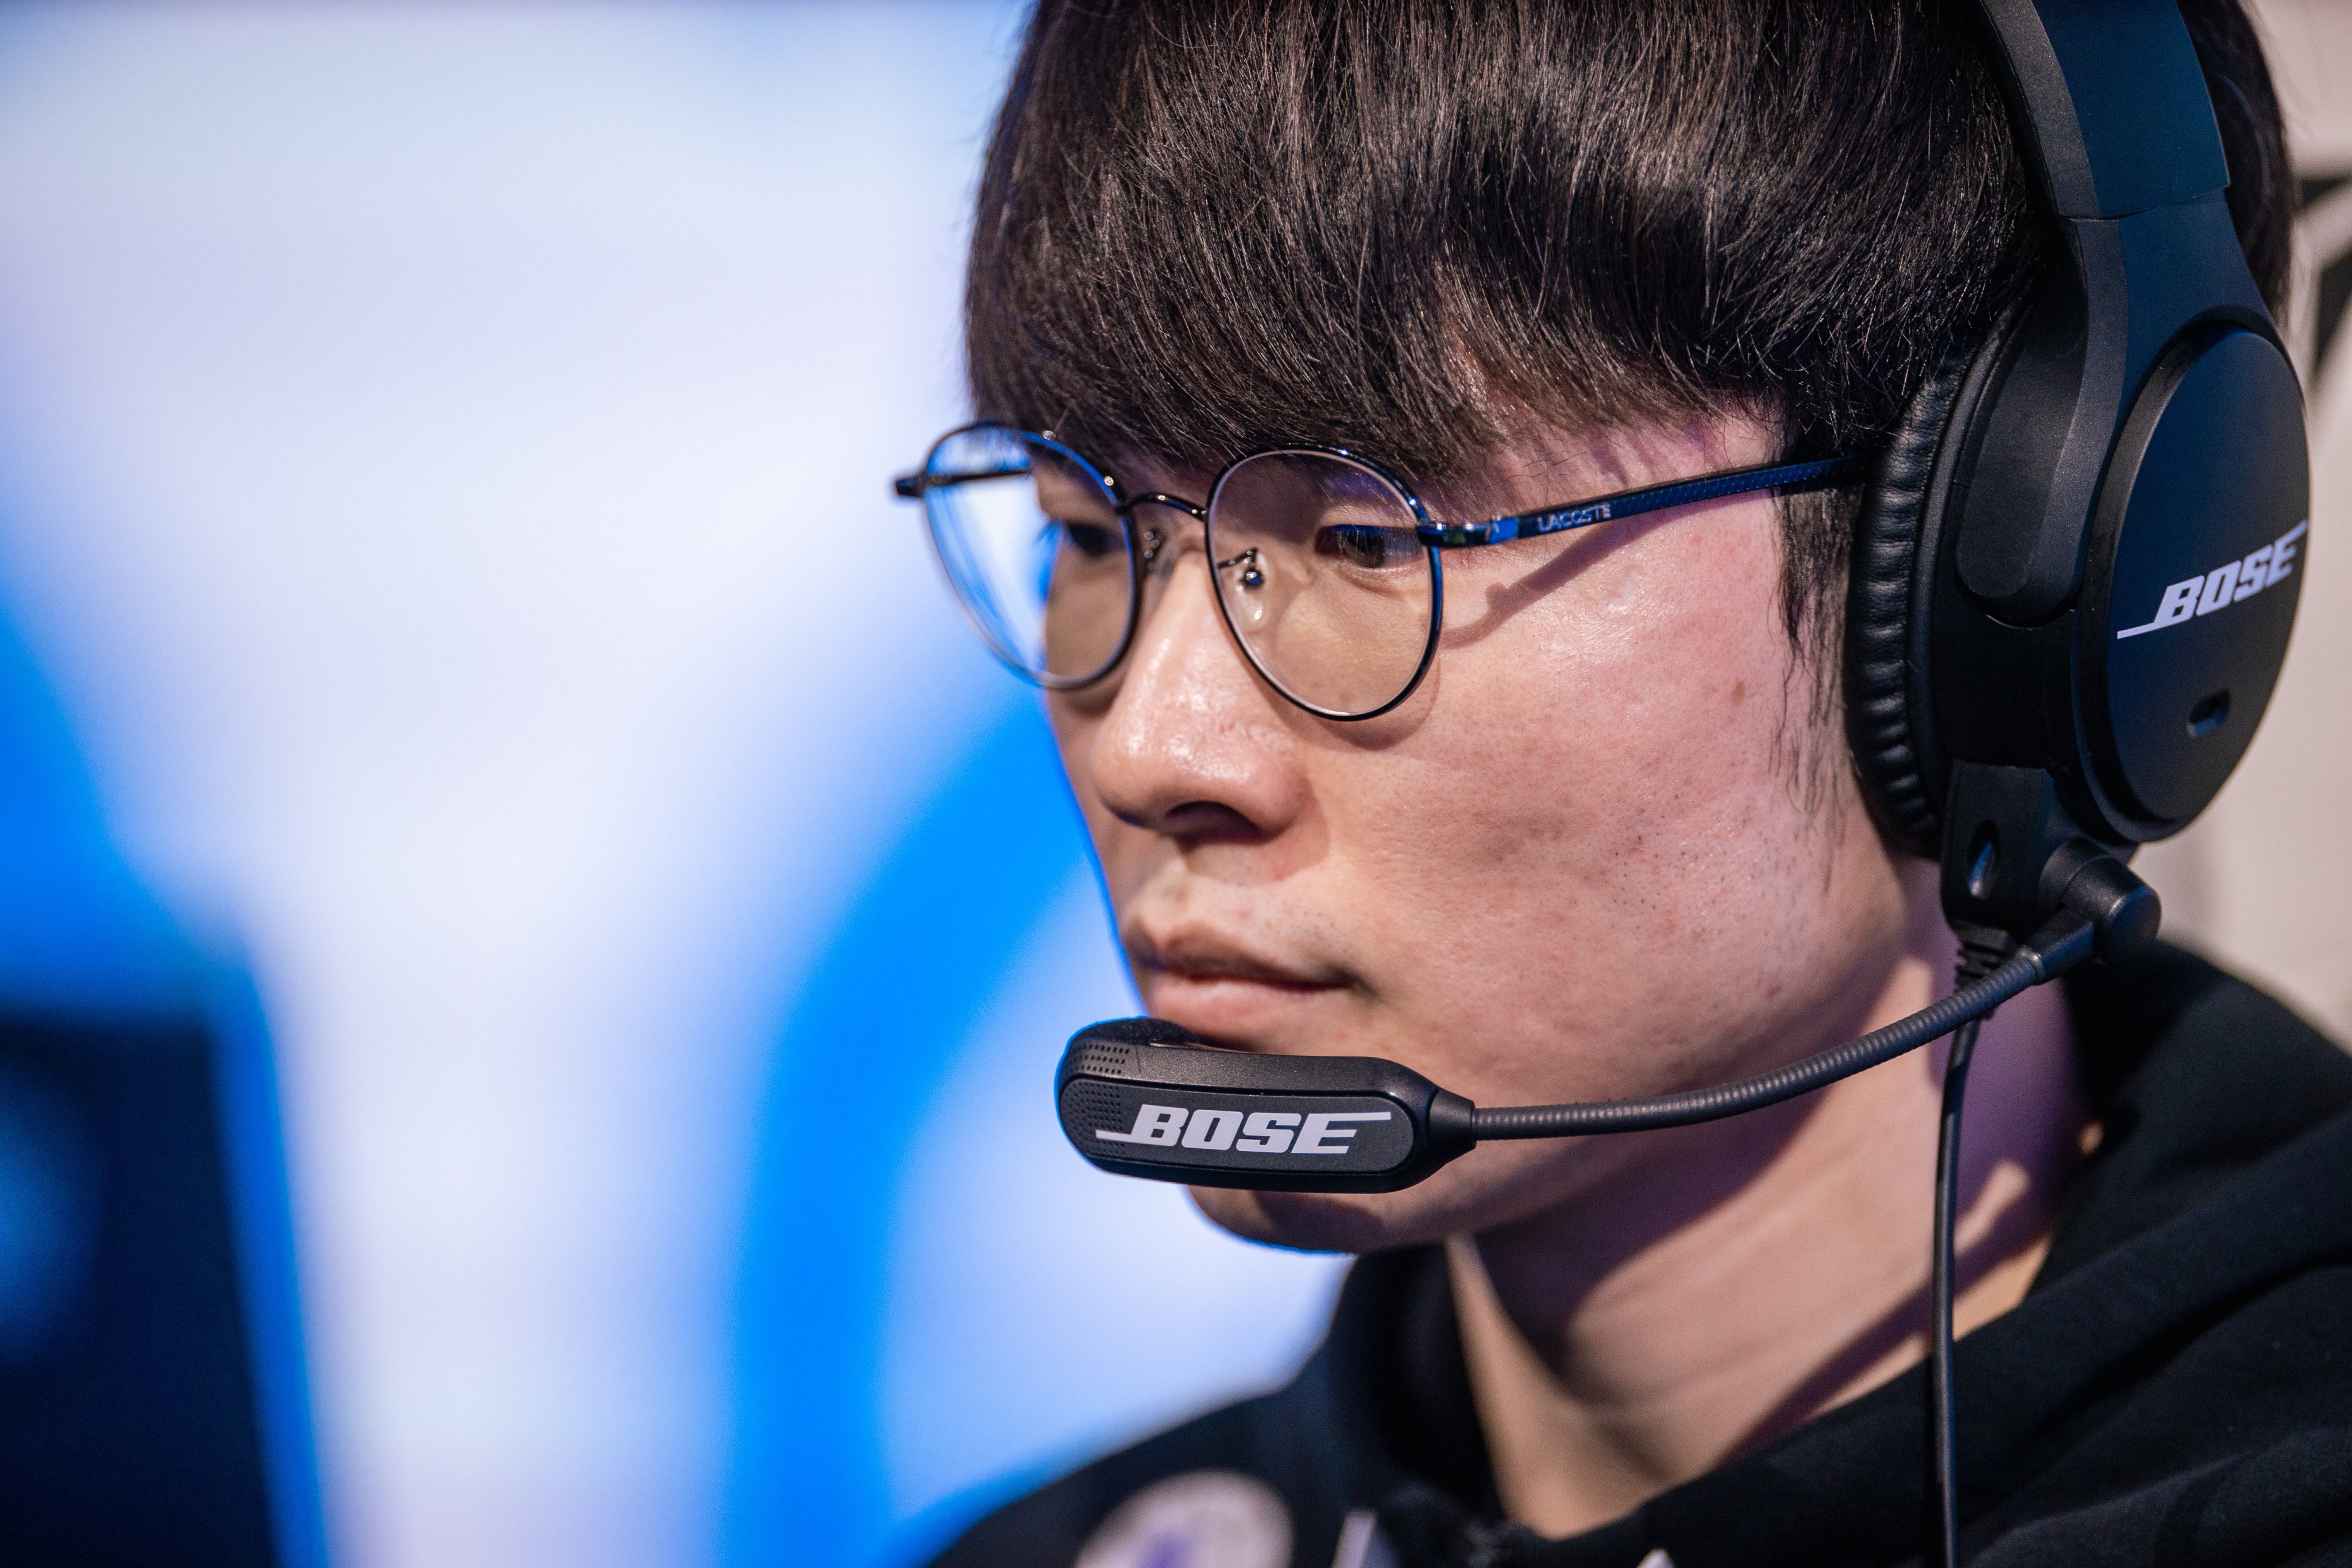 T1’s Lee “Faker” Sang-hyeok competes at the League of Legends World Championship Groups Stage in Reykjavik last year. Photo: Riot Games